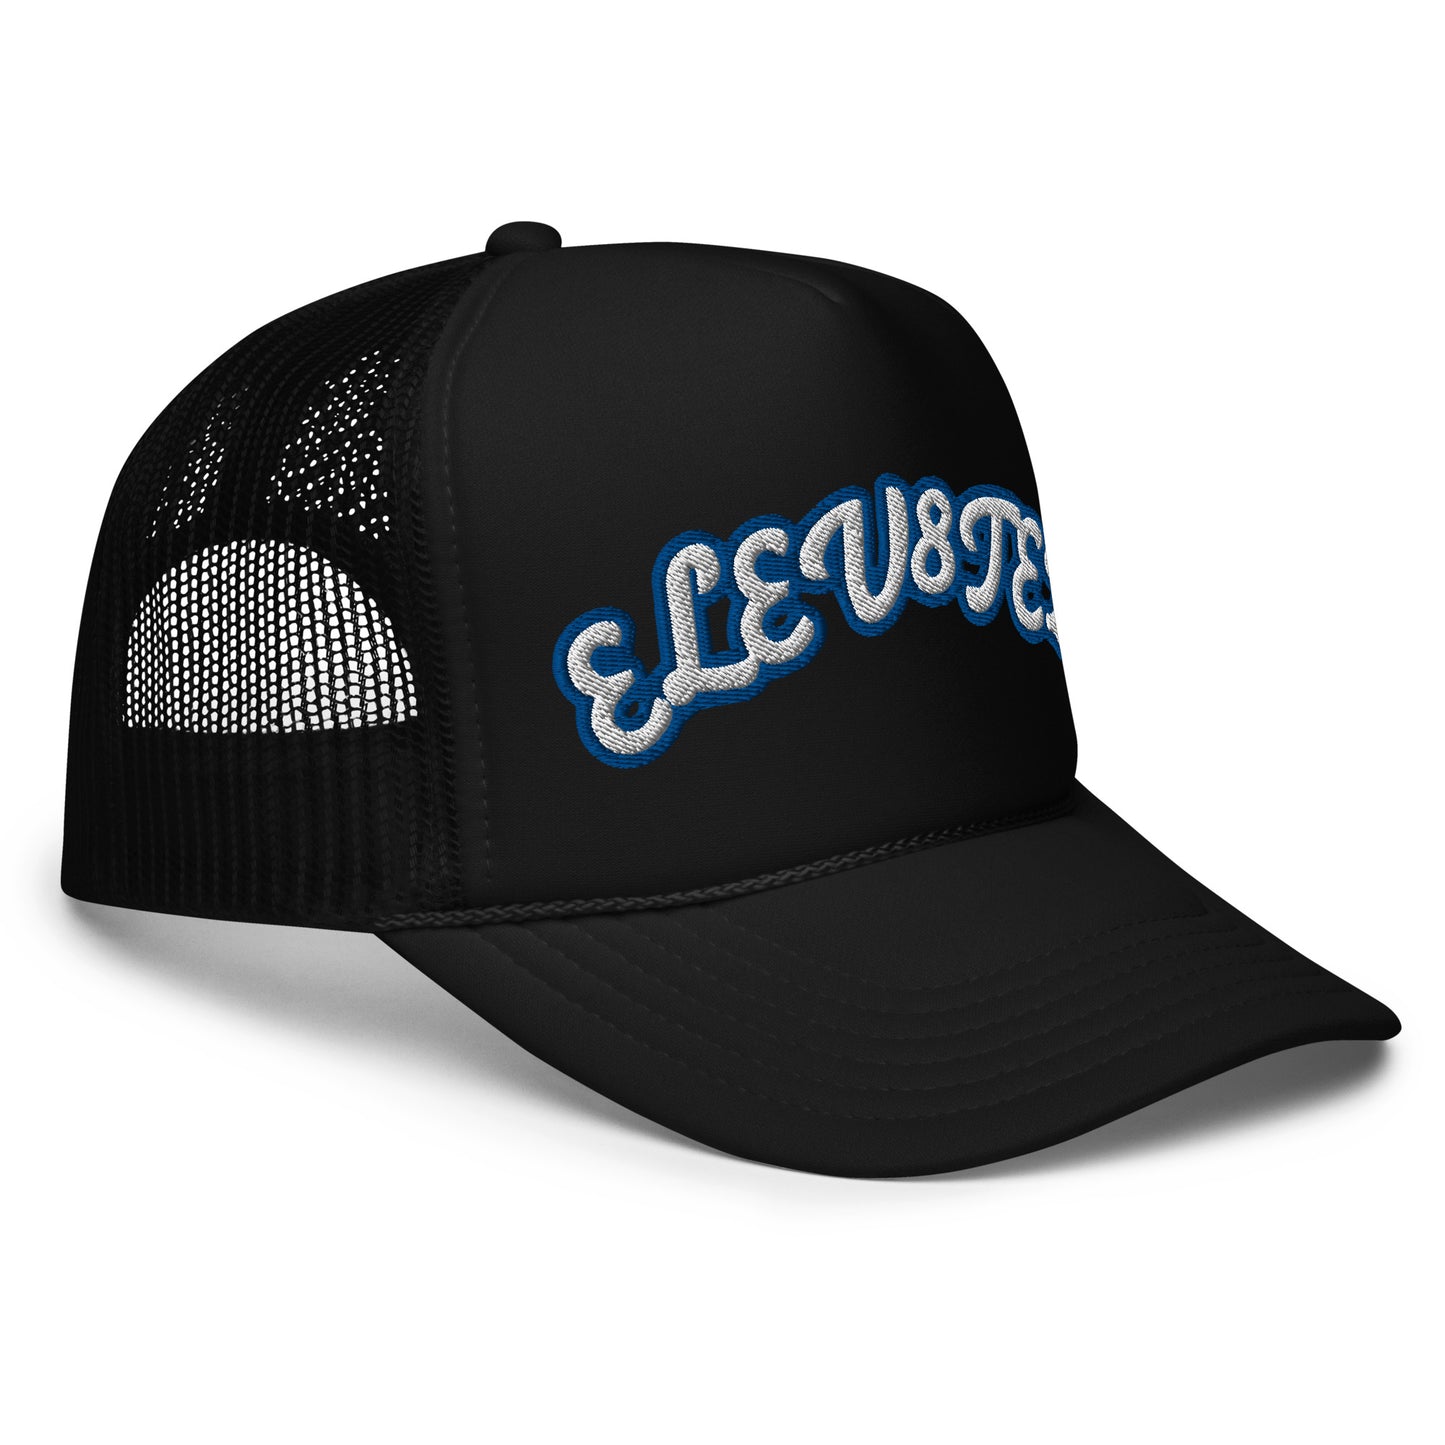 ELEV8TED (Rivalry Game Label) Trucker